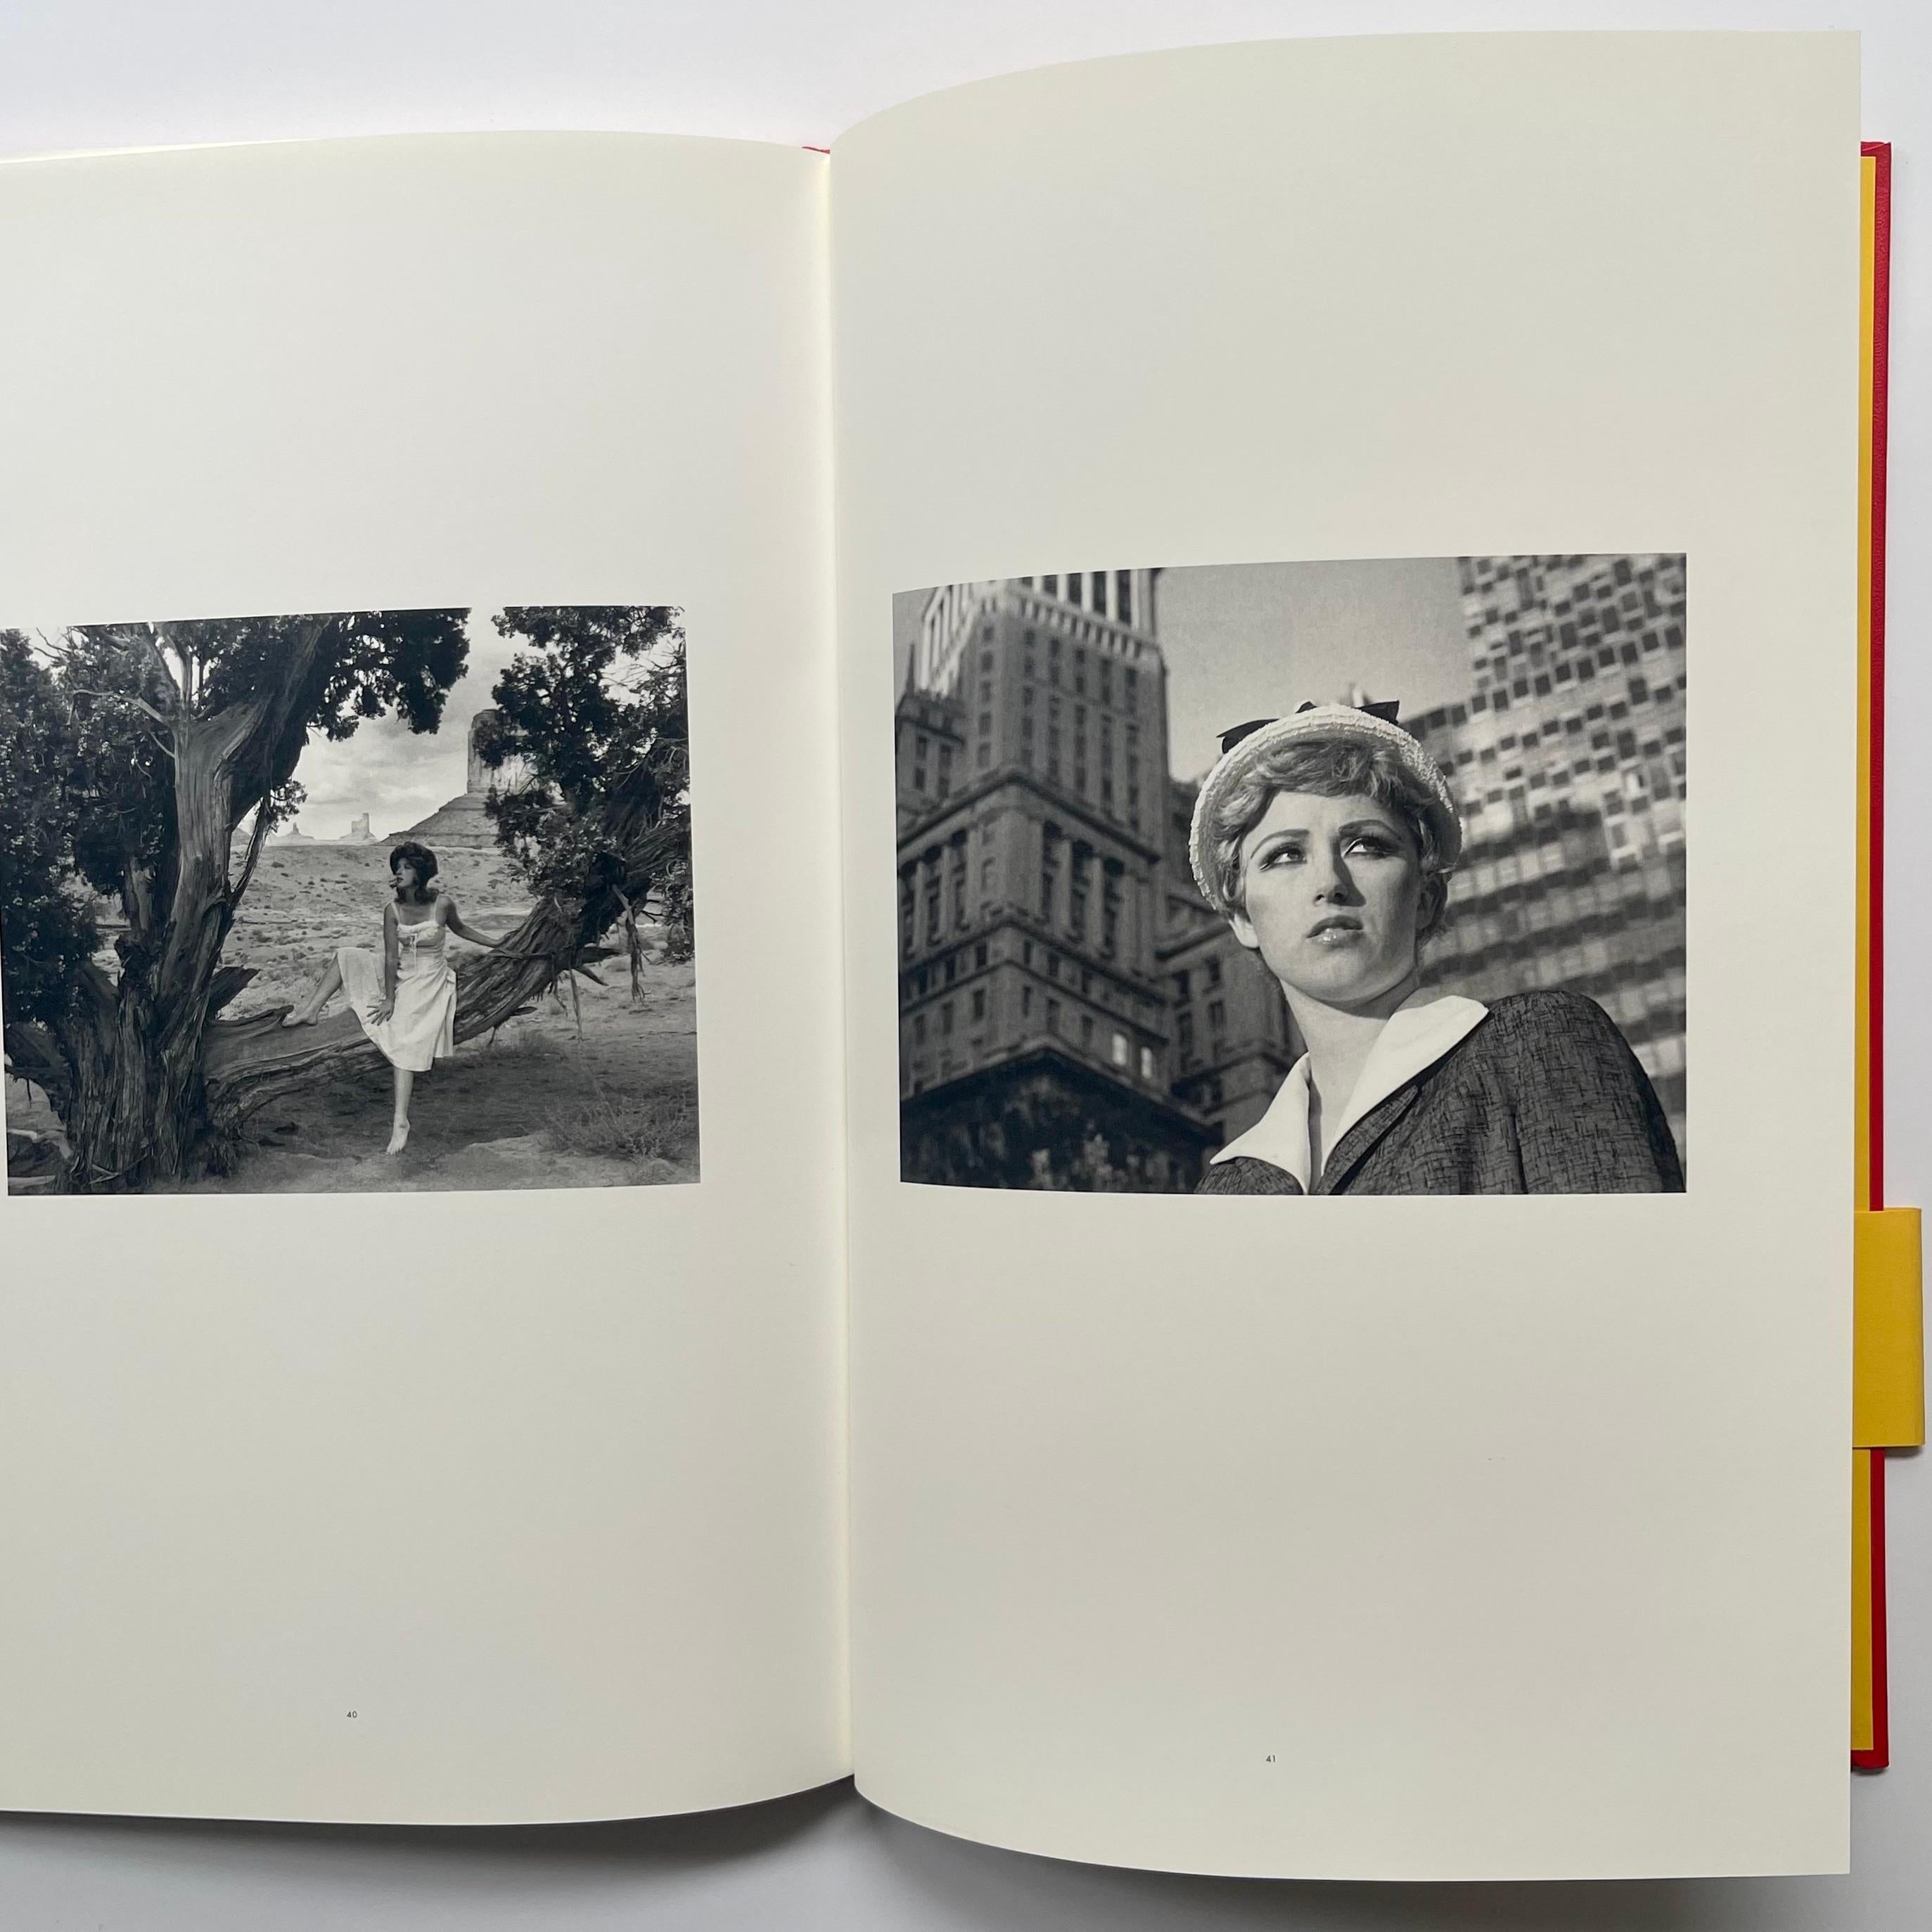 First Edition, published by Hasselblad Center, Gothenburg, Sweden, 2000.

Published to accompany the exhibition of Cindy Sherman’s work at the Hasselblad Center in Gothenburg, Sweden, and the awarding of the Hasselblad Foundation International Award